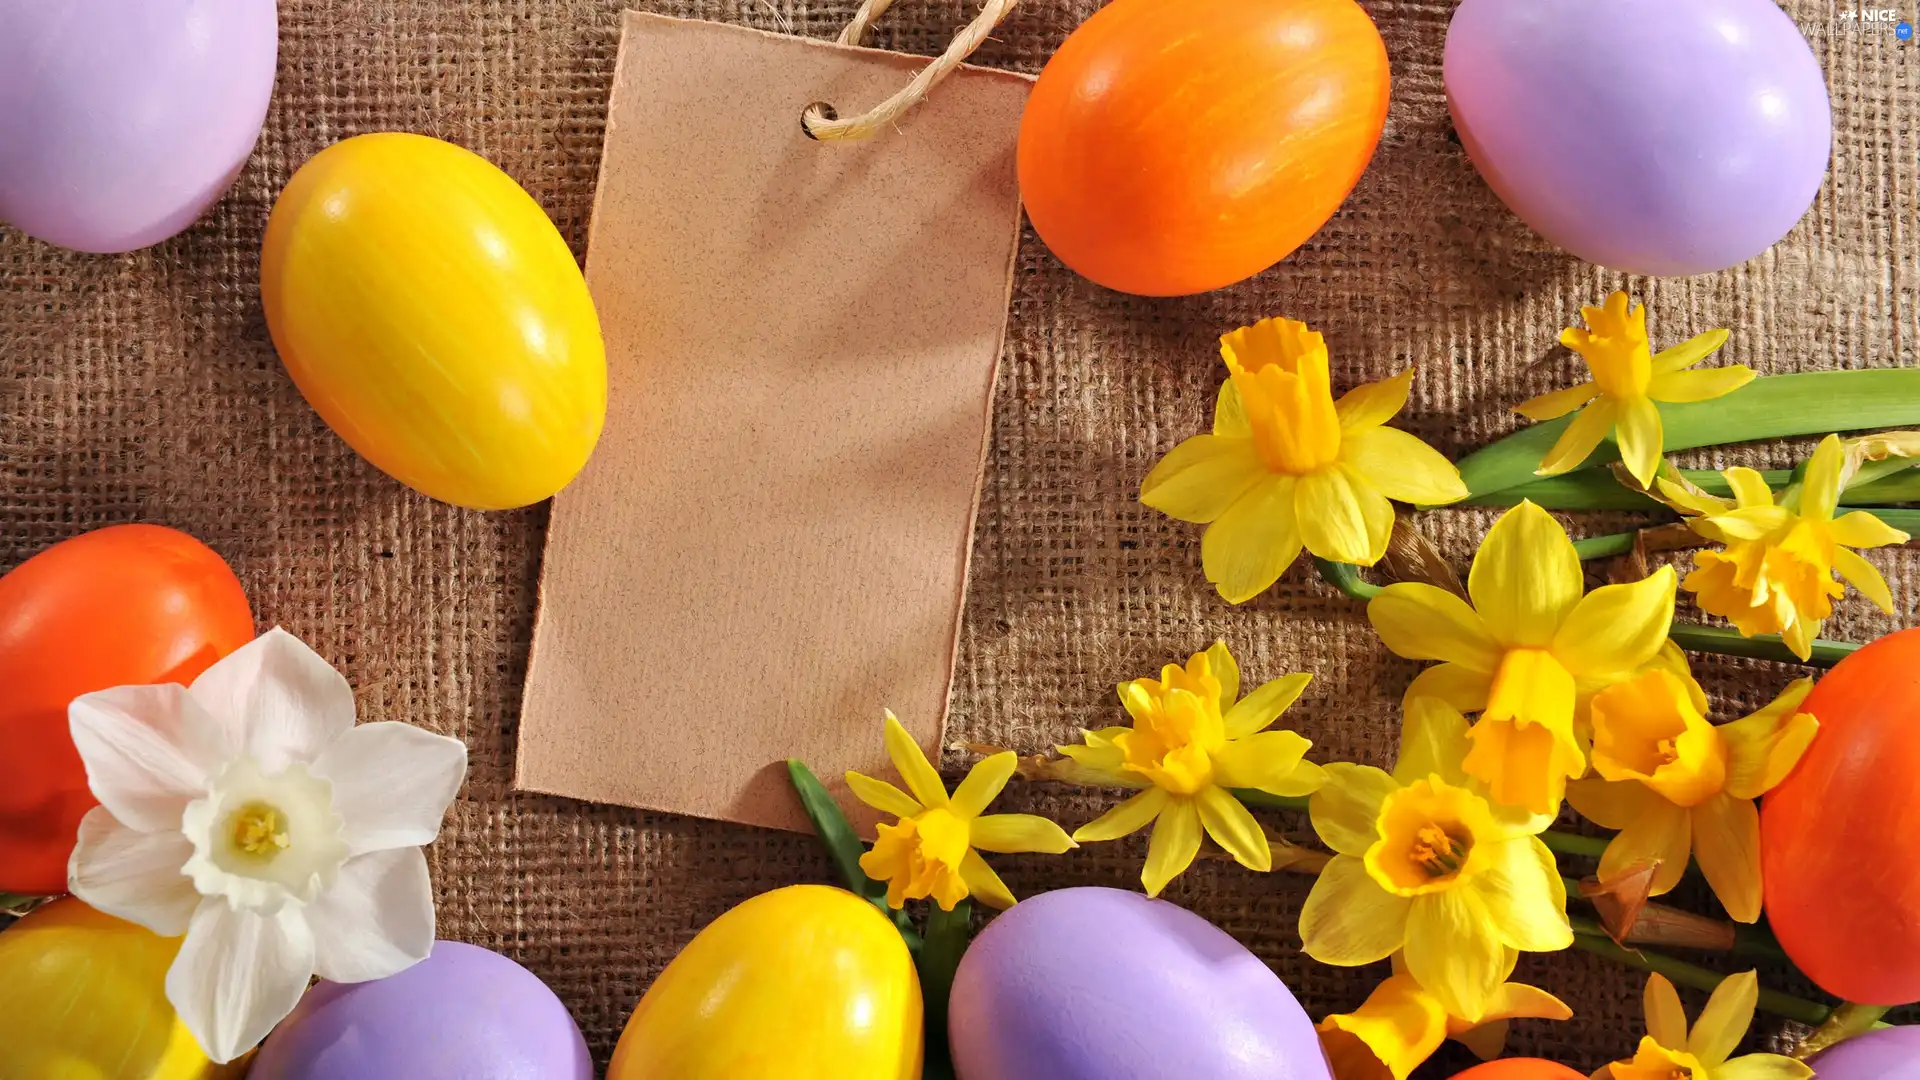 Easter, Daffodils, chit, eggs